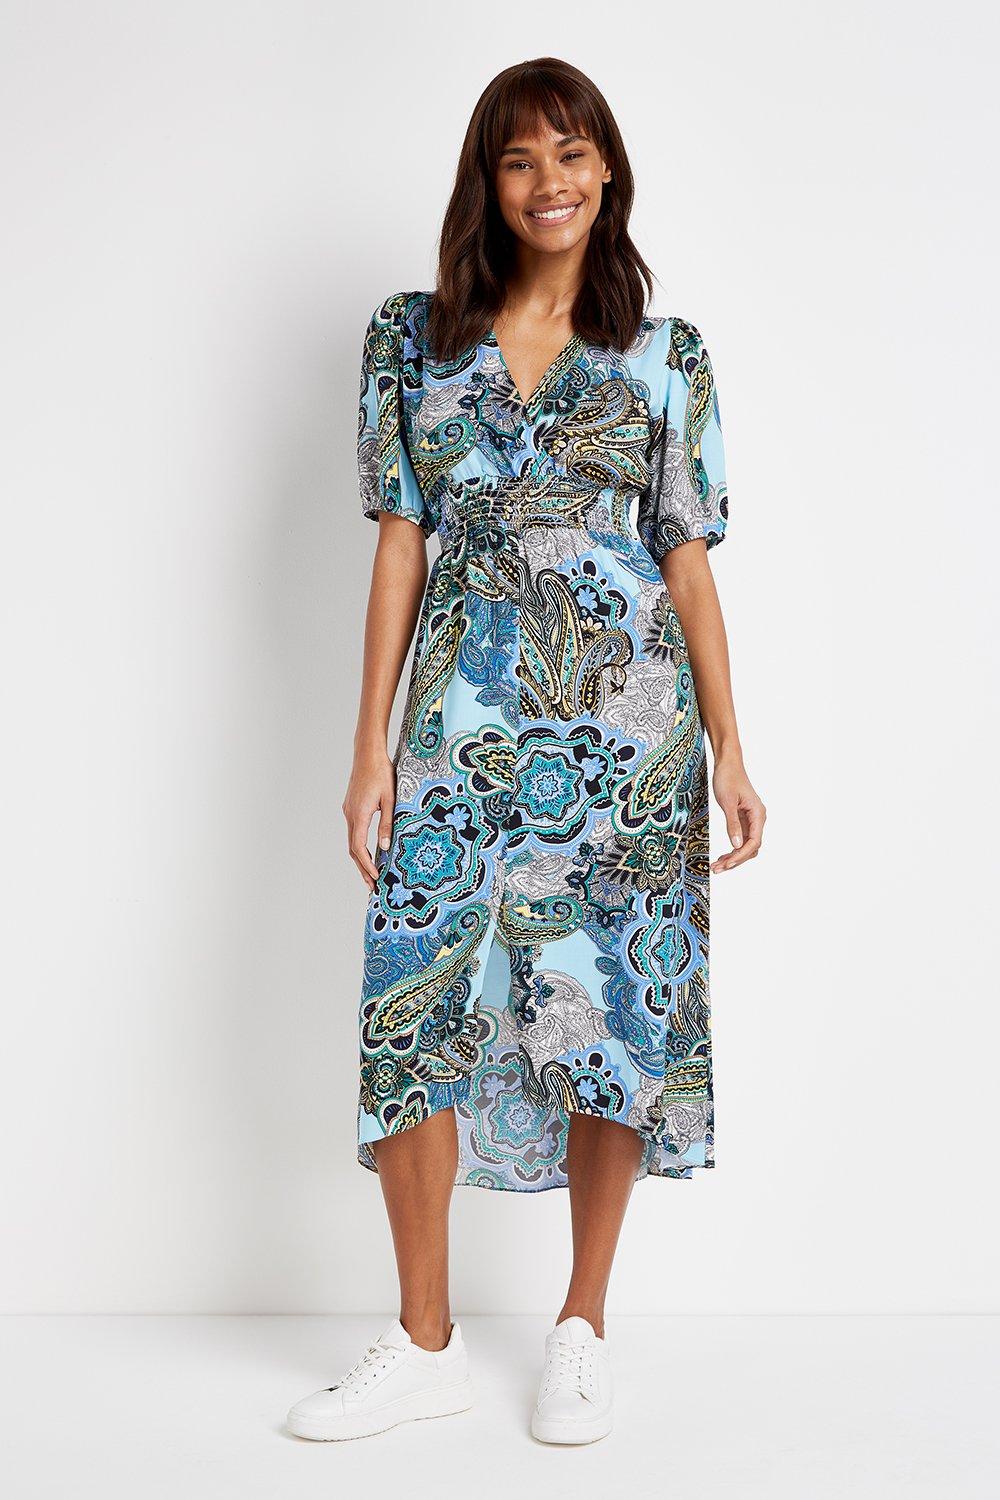 The Versatile Dress You'Ll Be Wearing On-Repeat. A Colourful Paisley Print Will Brighten Up Your Everyday Outfits, Whilst Puff Sleeves, A Midi Skirt And Slit Detailing Keep This On-Trend. Dress Down For Everyday With Chunky White Trainers, Or Swap For Hee